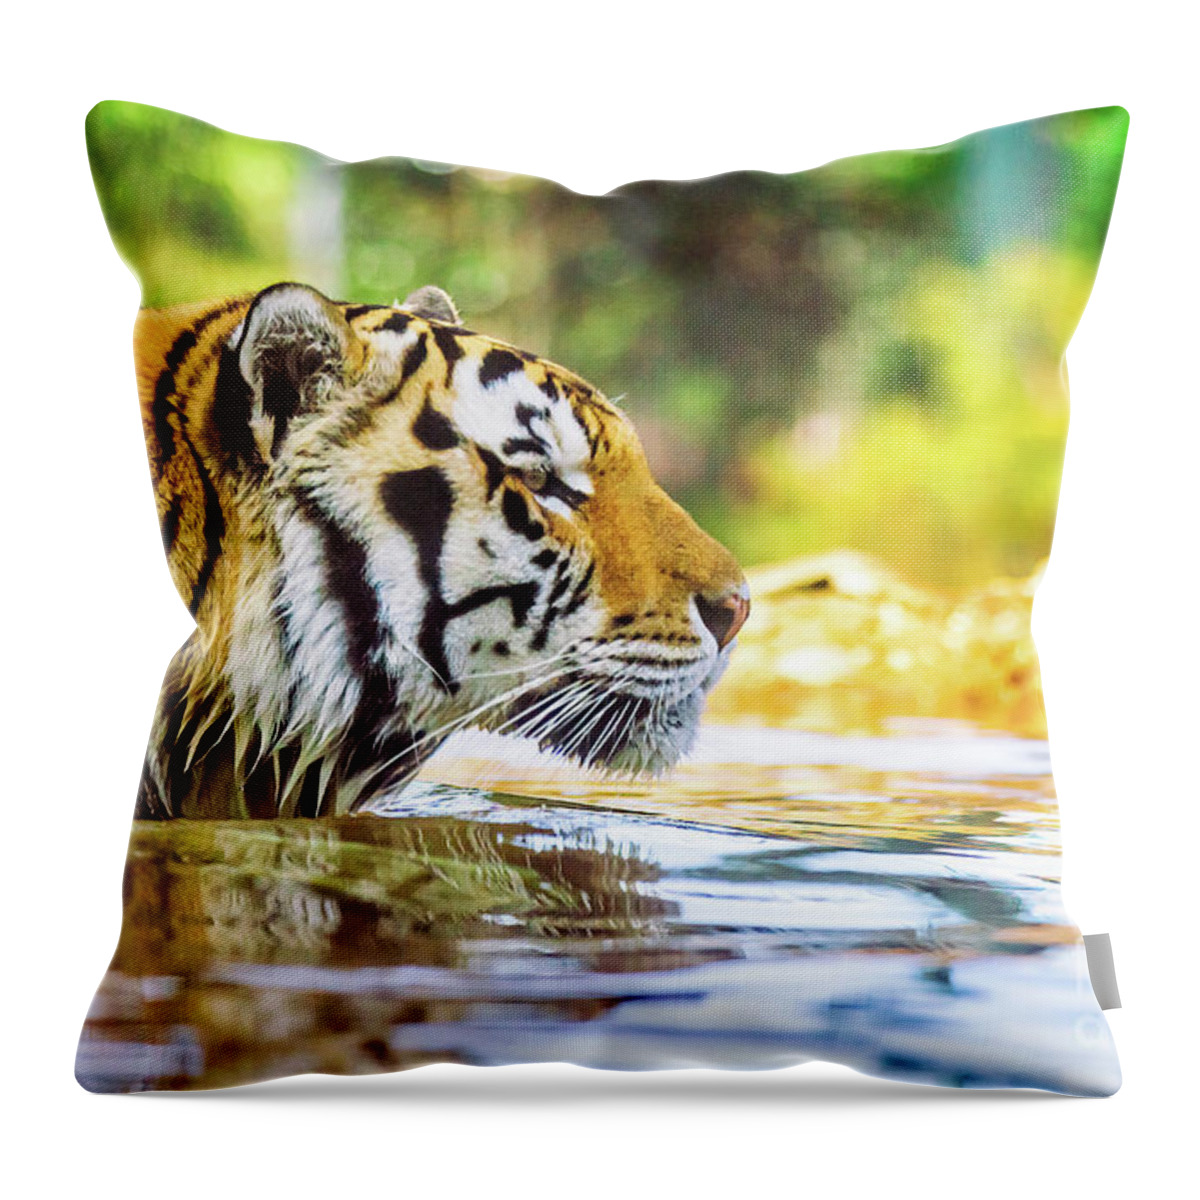 Mike Throw Pillow featuring the photograph You're Mine by Scott Pellegrin